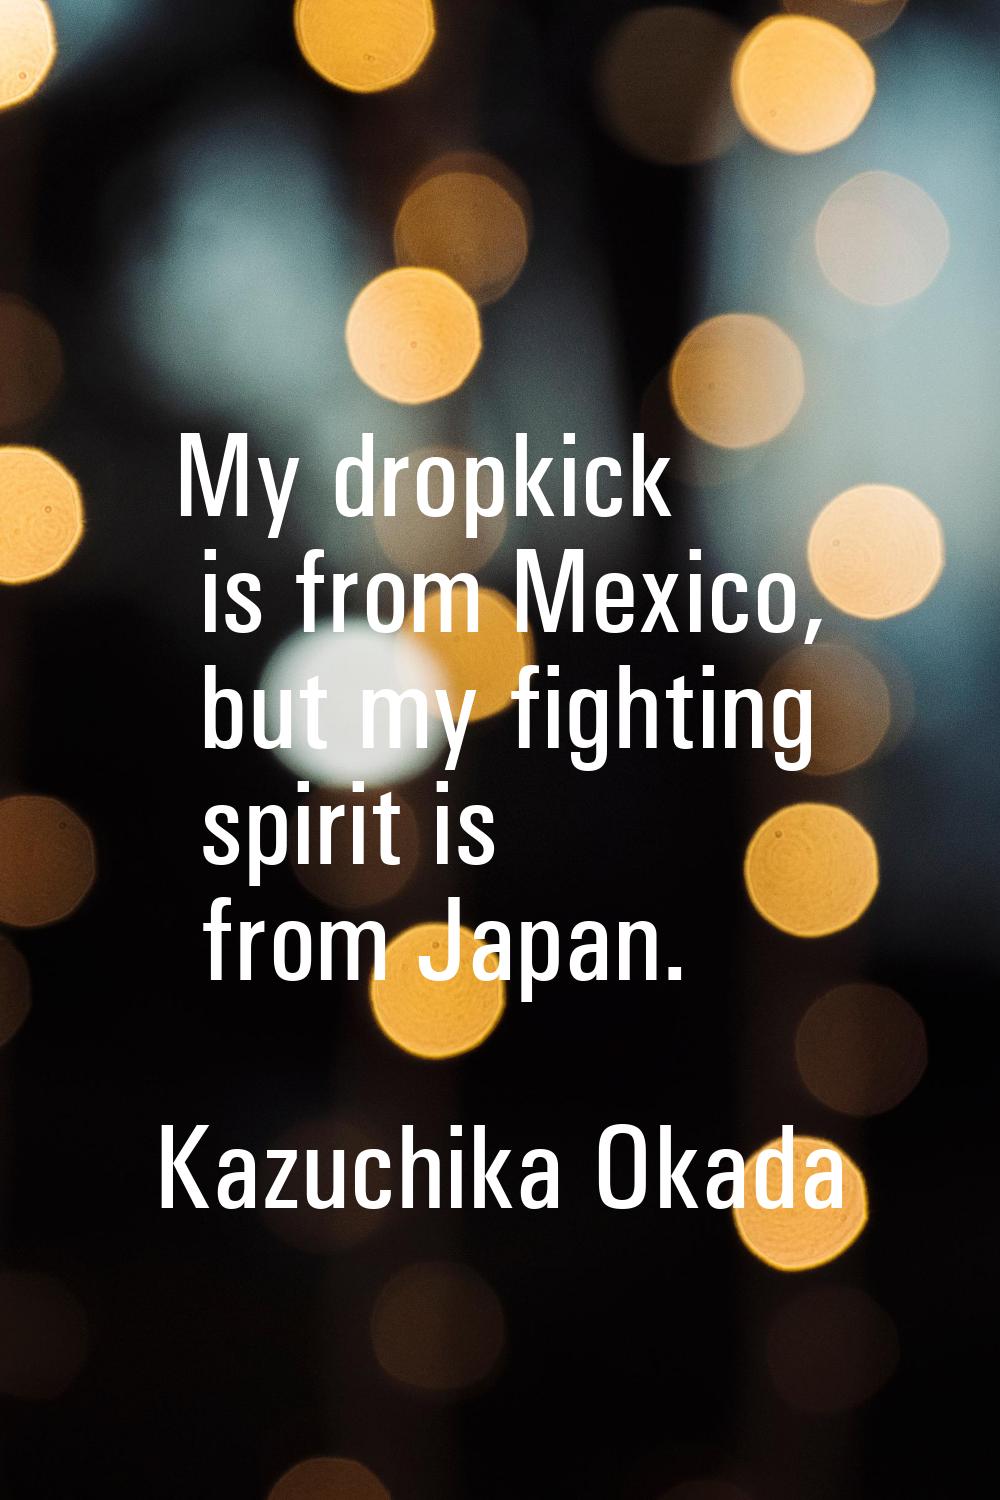 My dropkick is from Mexico, but my fighting spirit is from Japan.